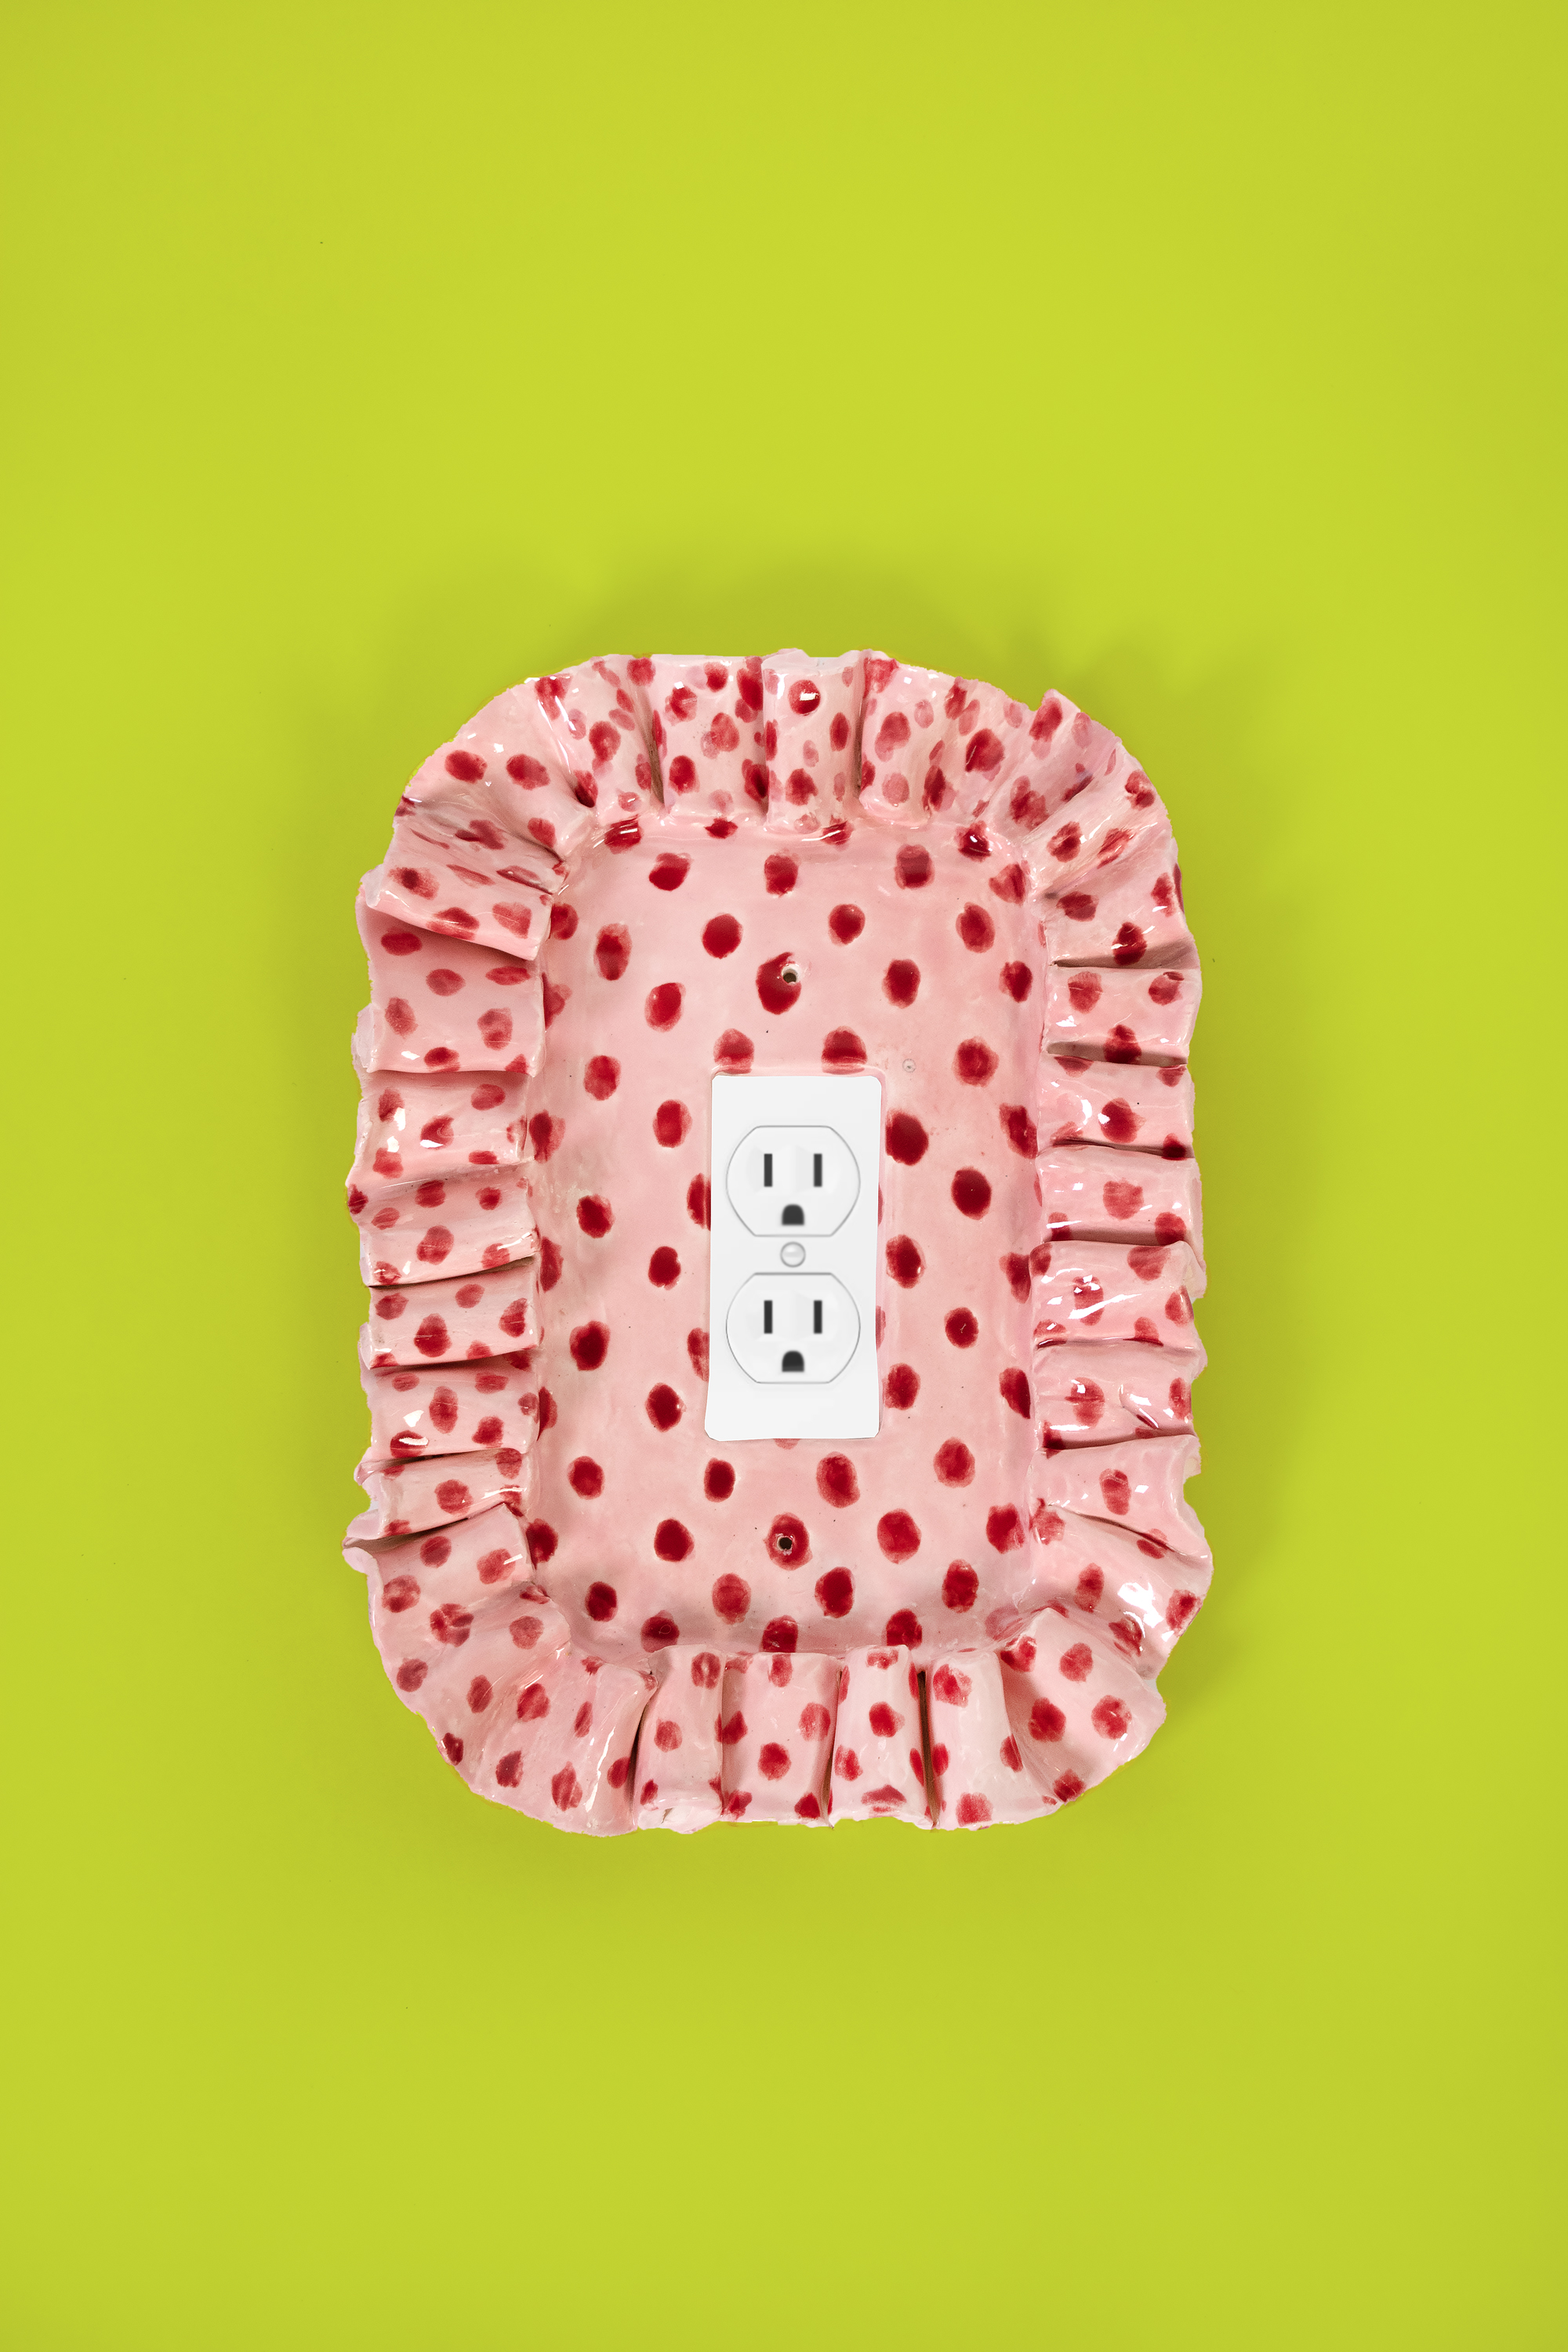 outlet cover, ceramic, ceramic outlet cover